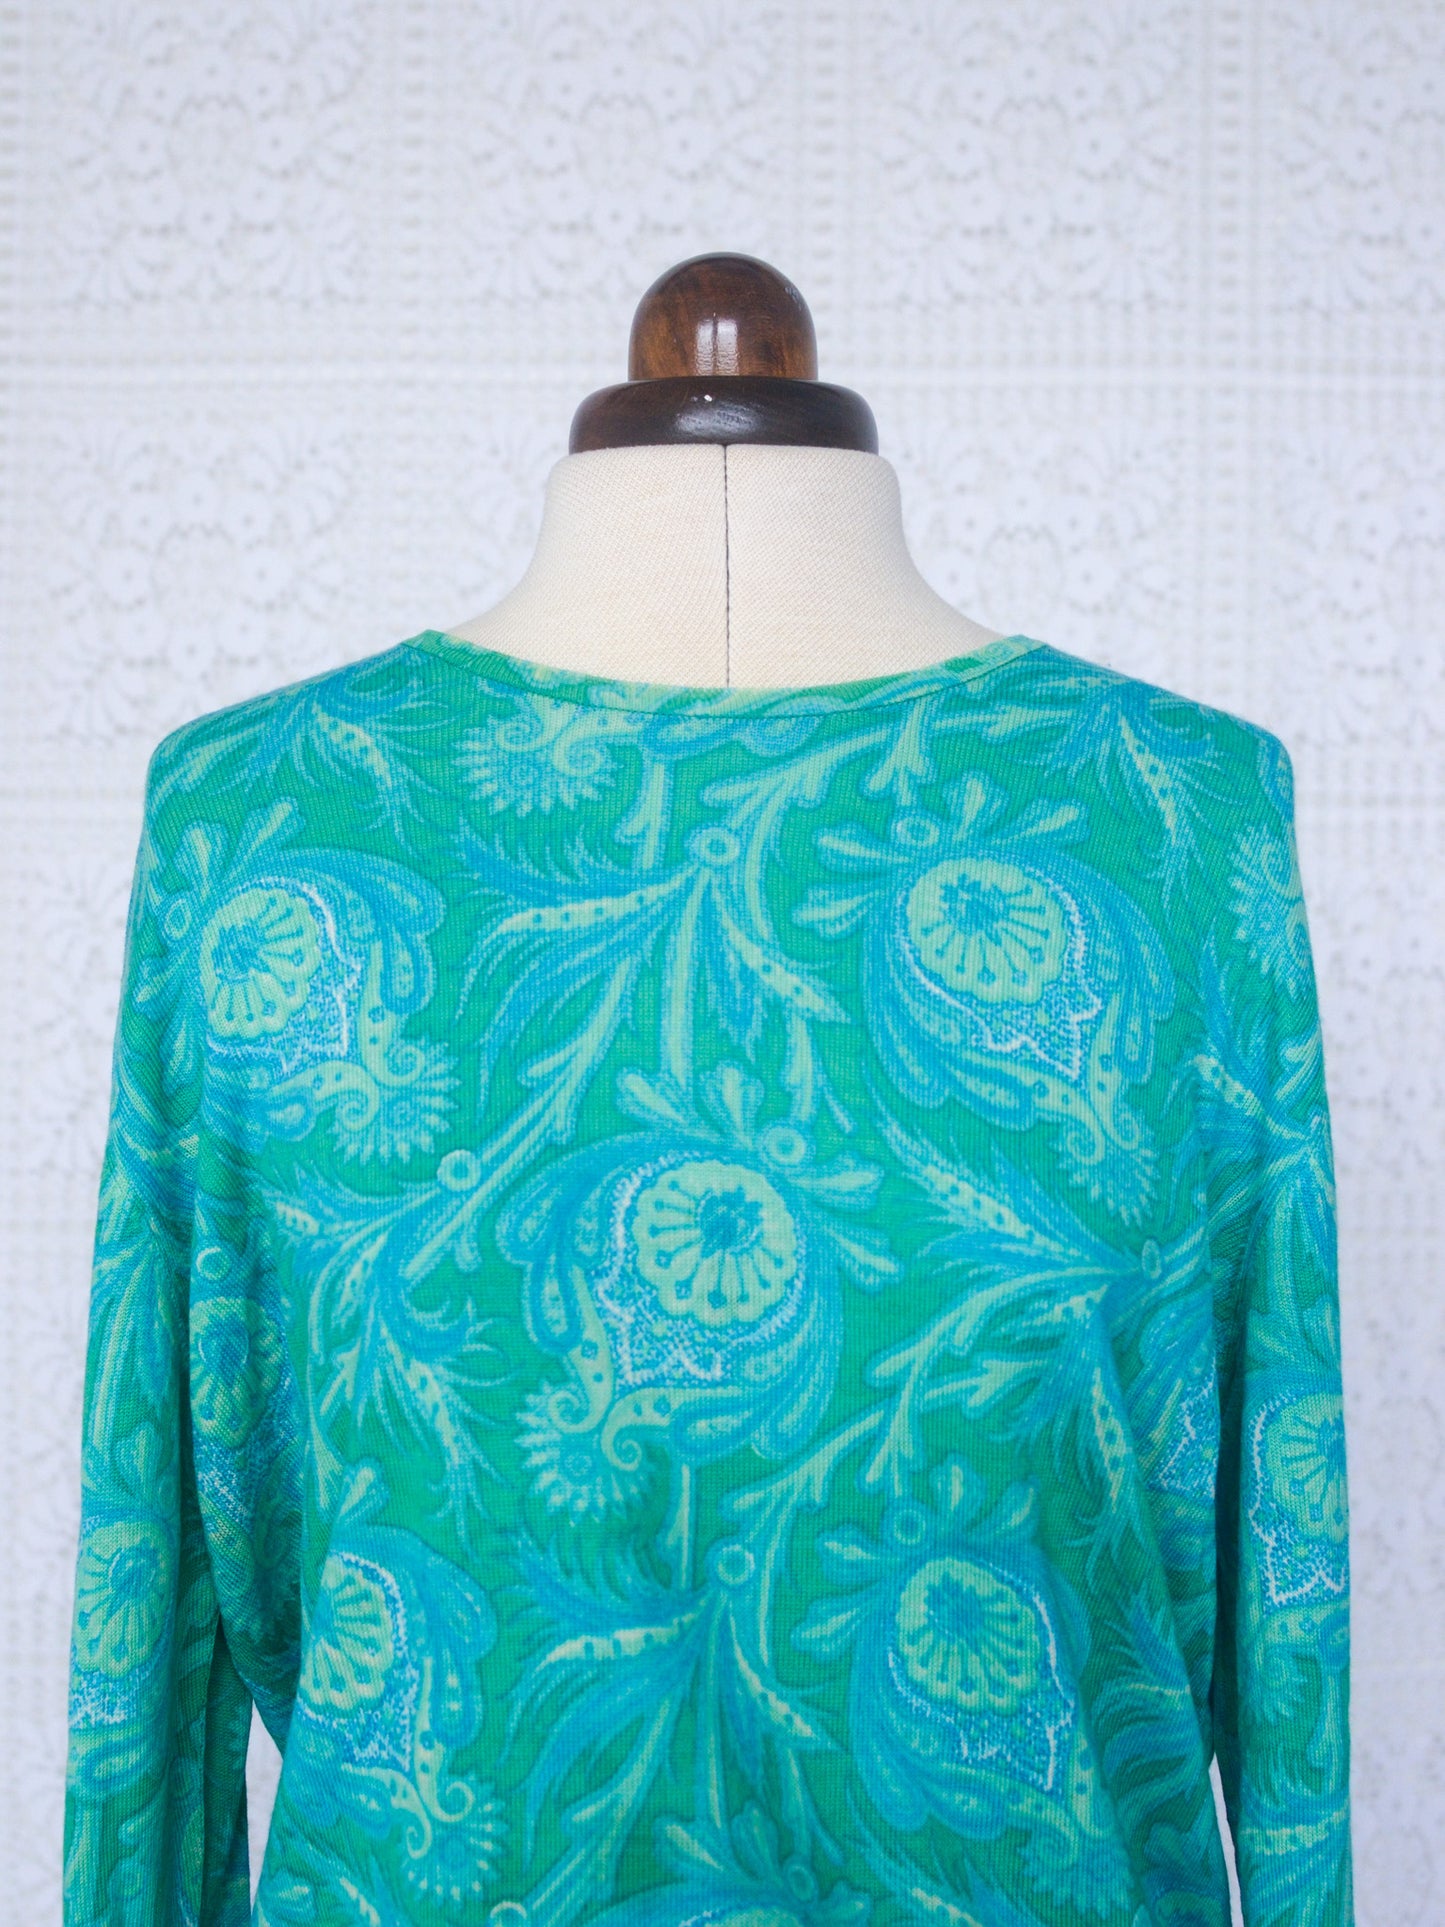 1970s style green and blue large floral print soft long sleeve jumper